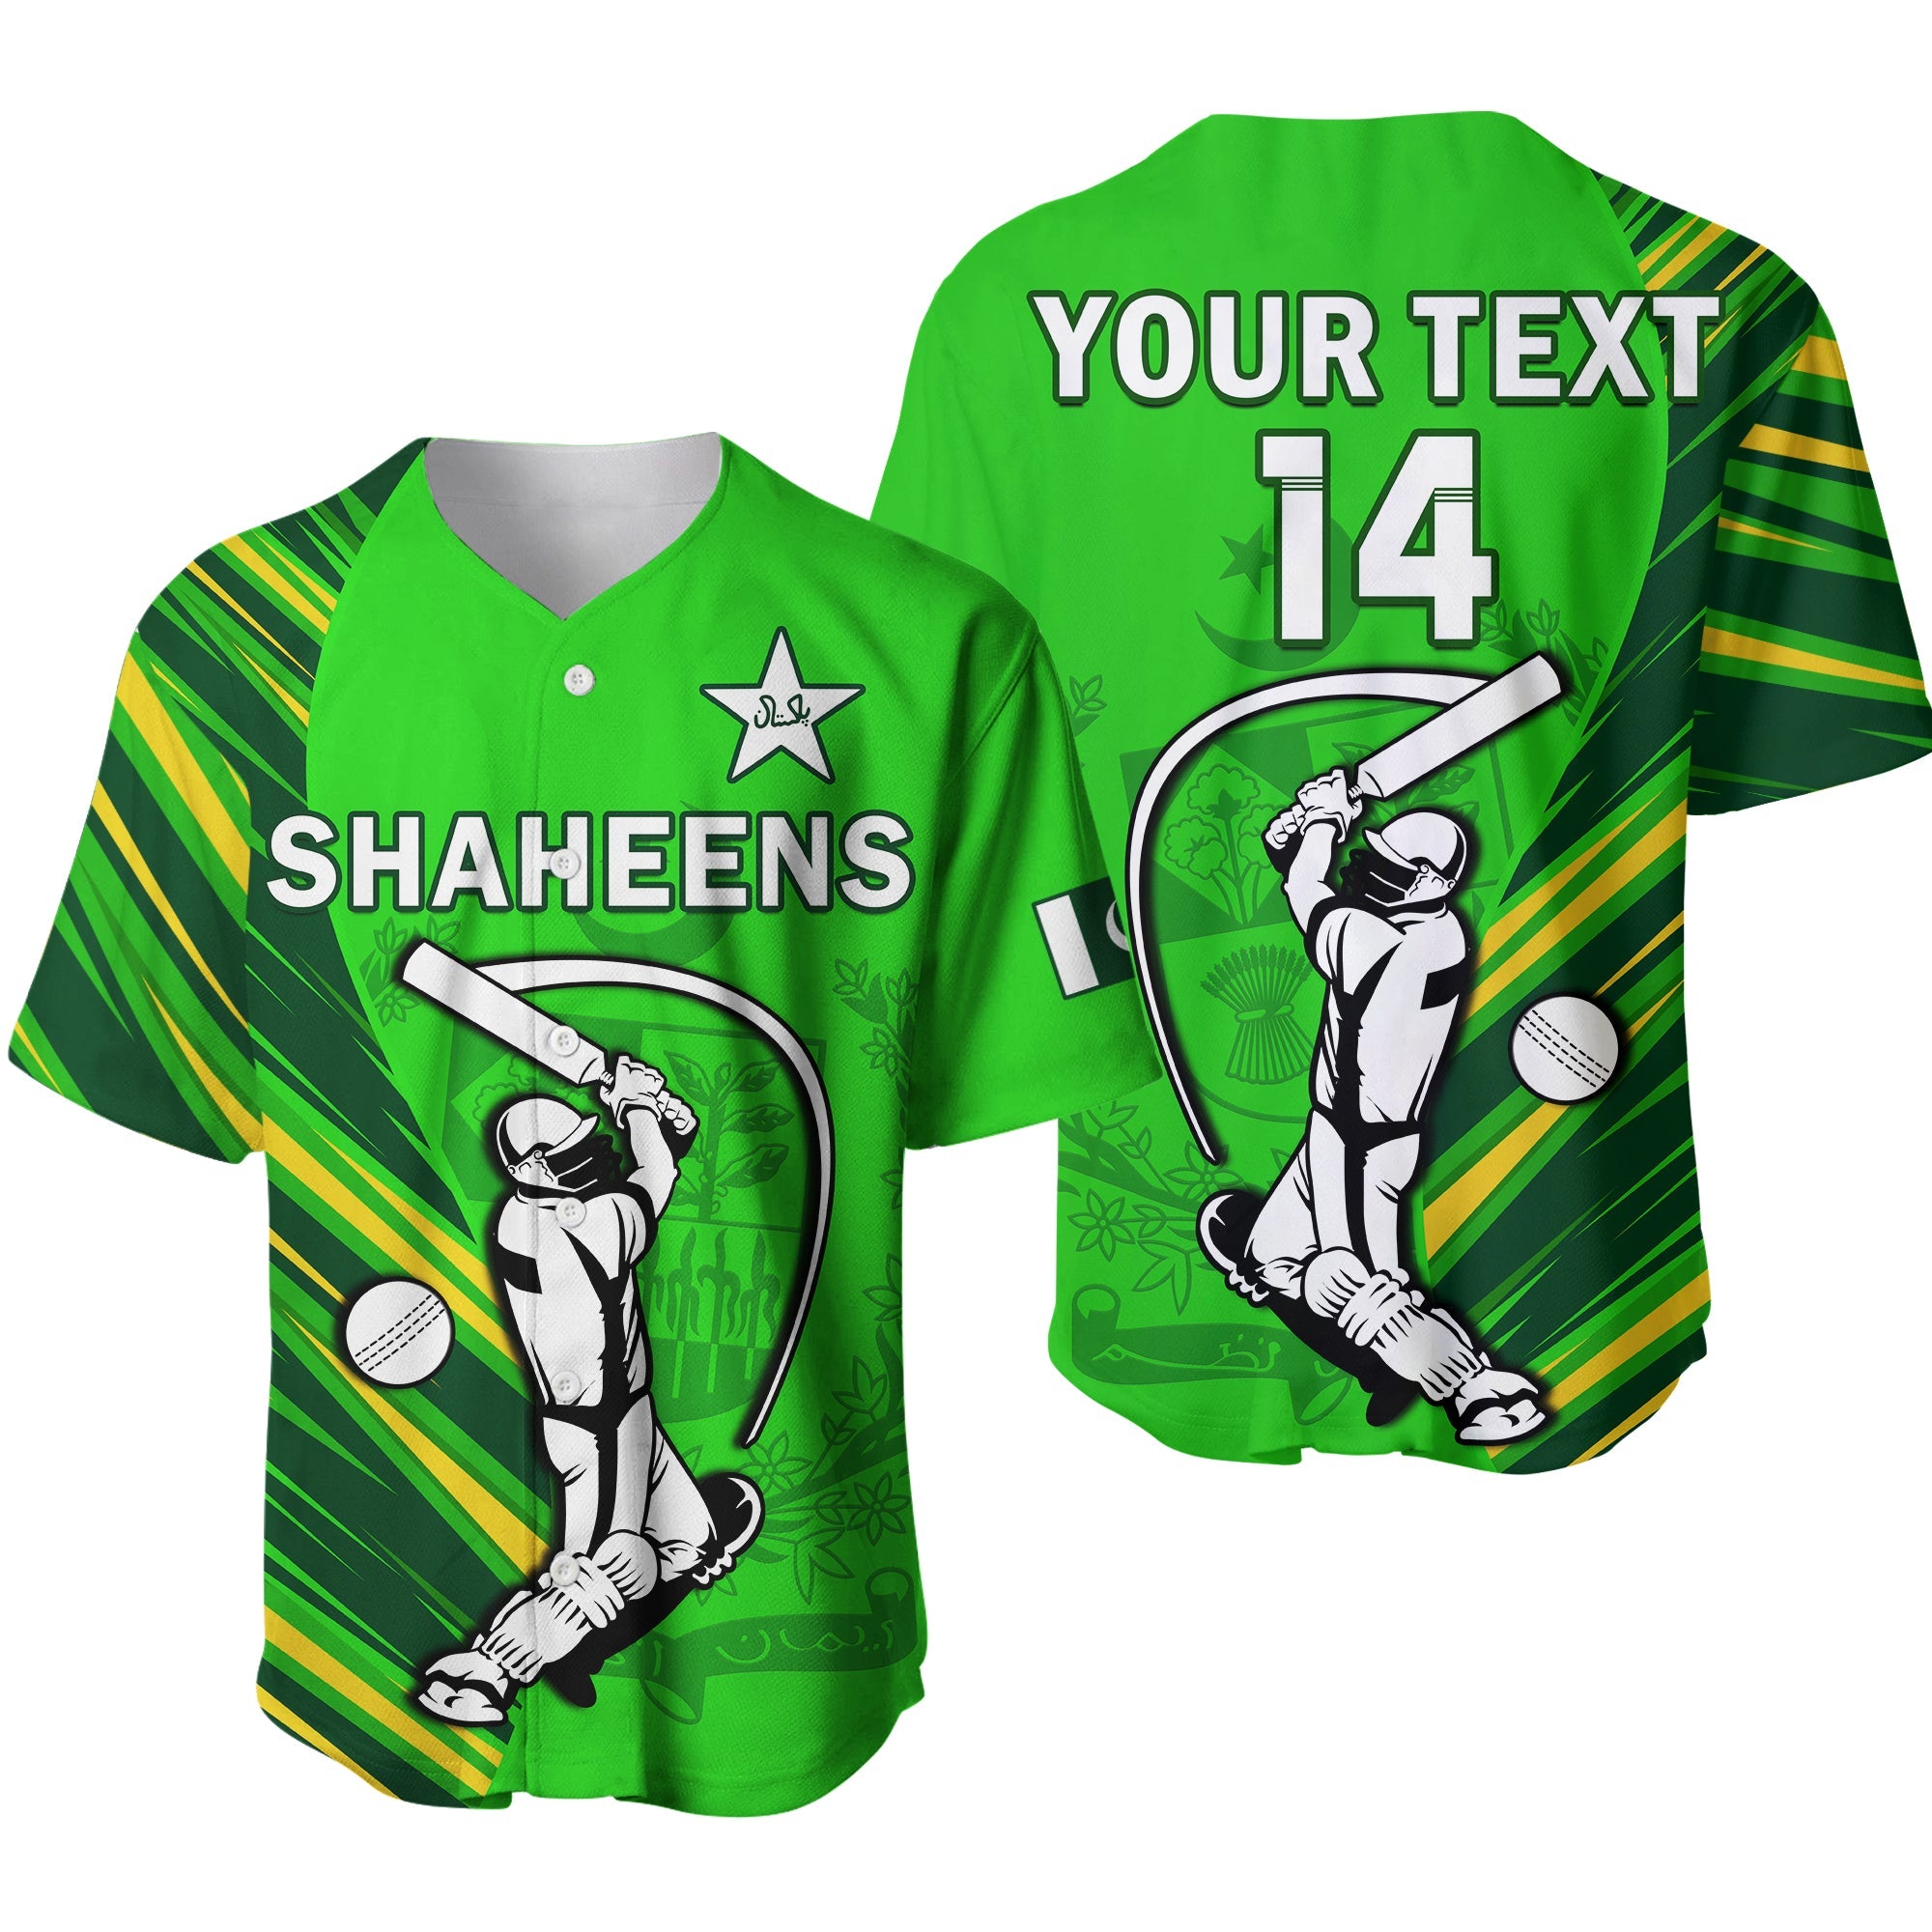 custom-text-and-number-pakistan-cricket-baseball-jersey-go-shaheens-simple-style